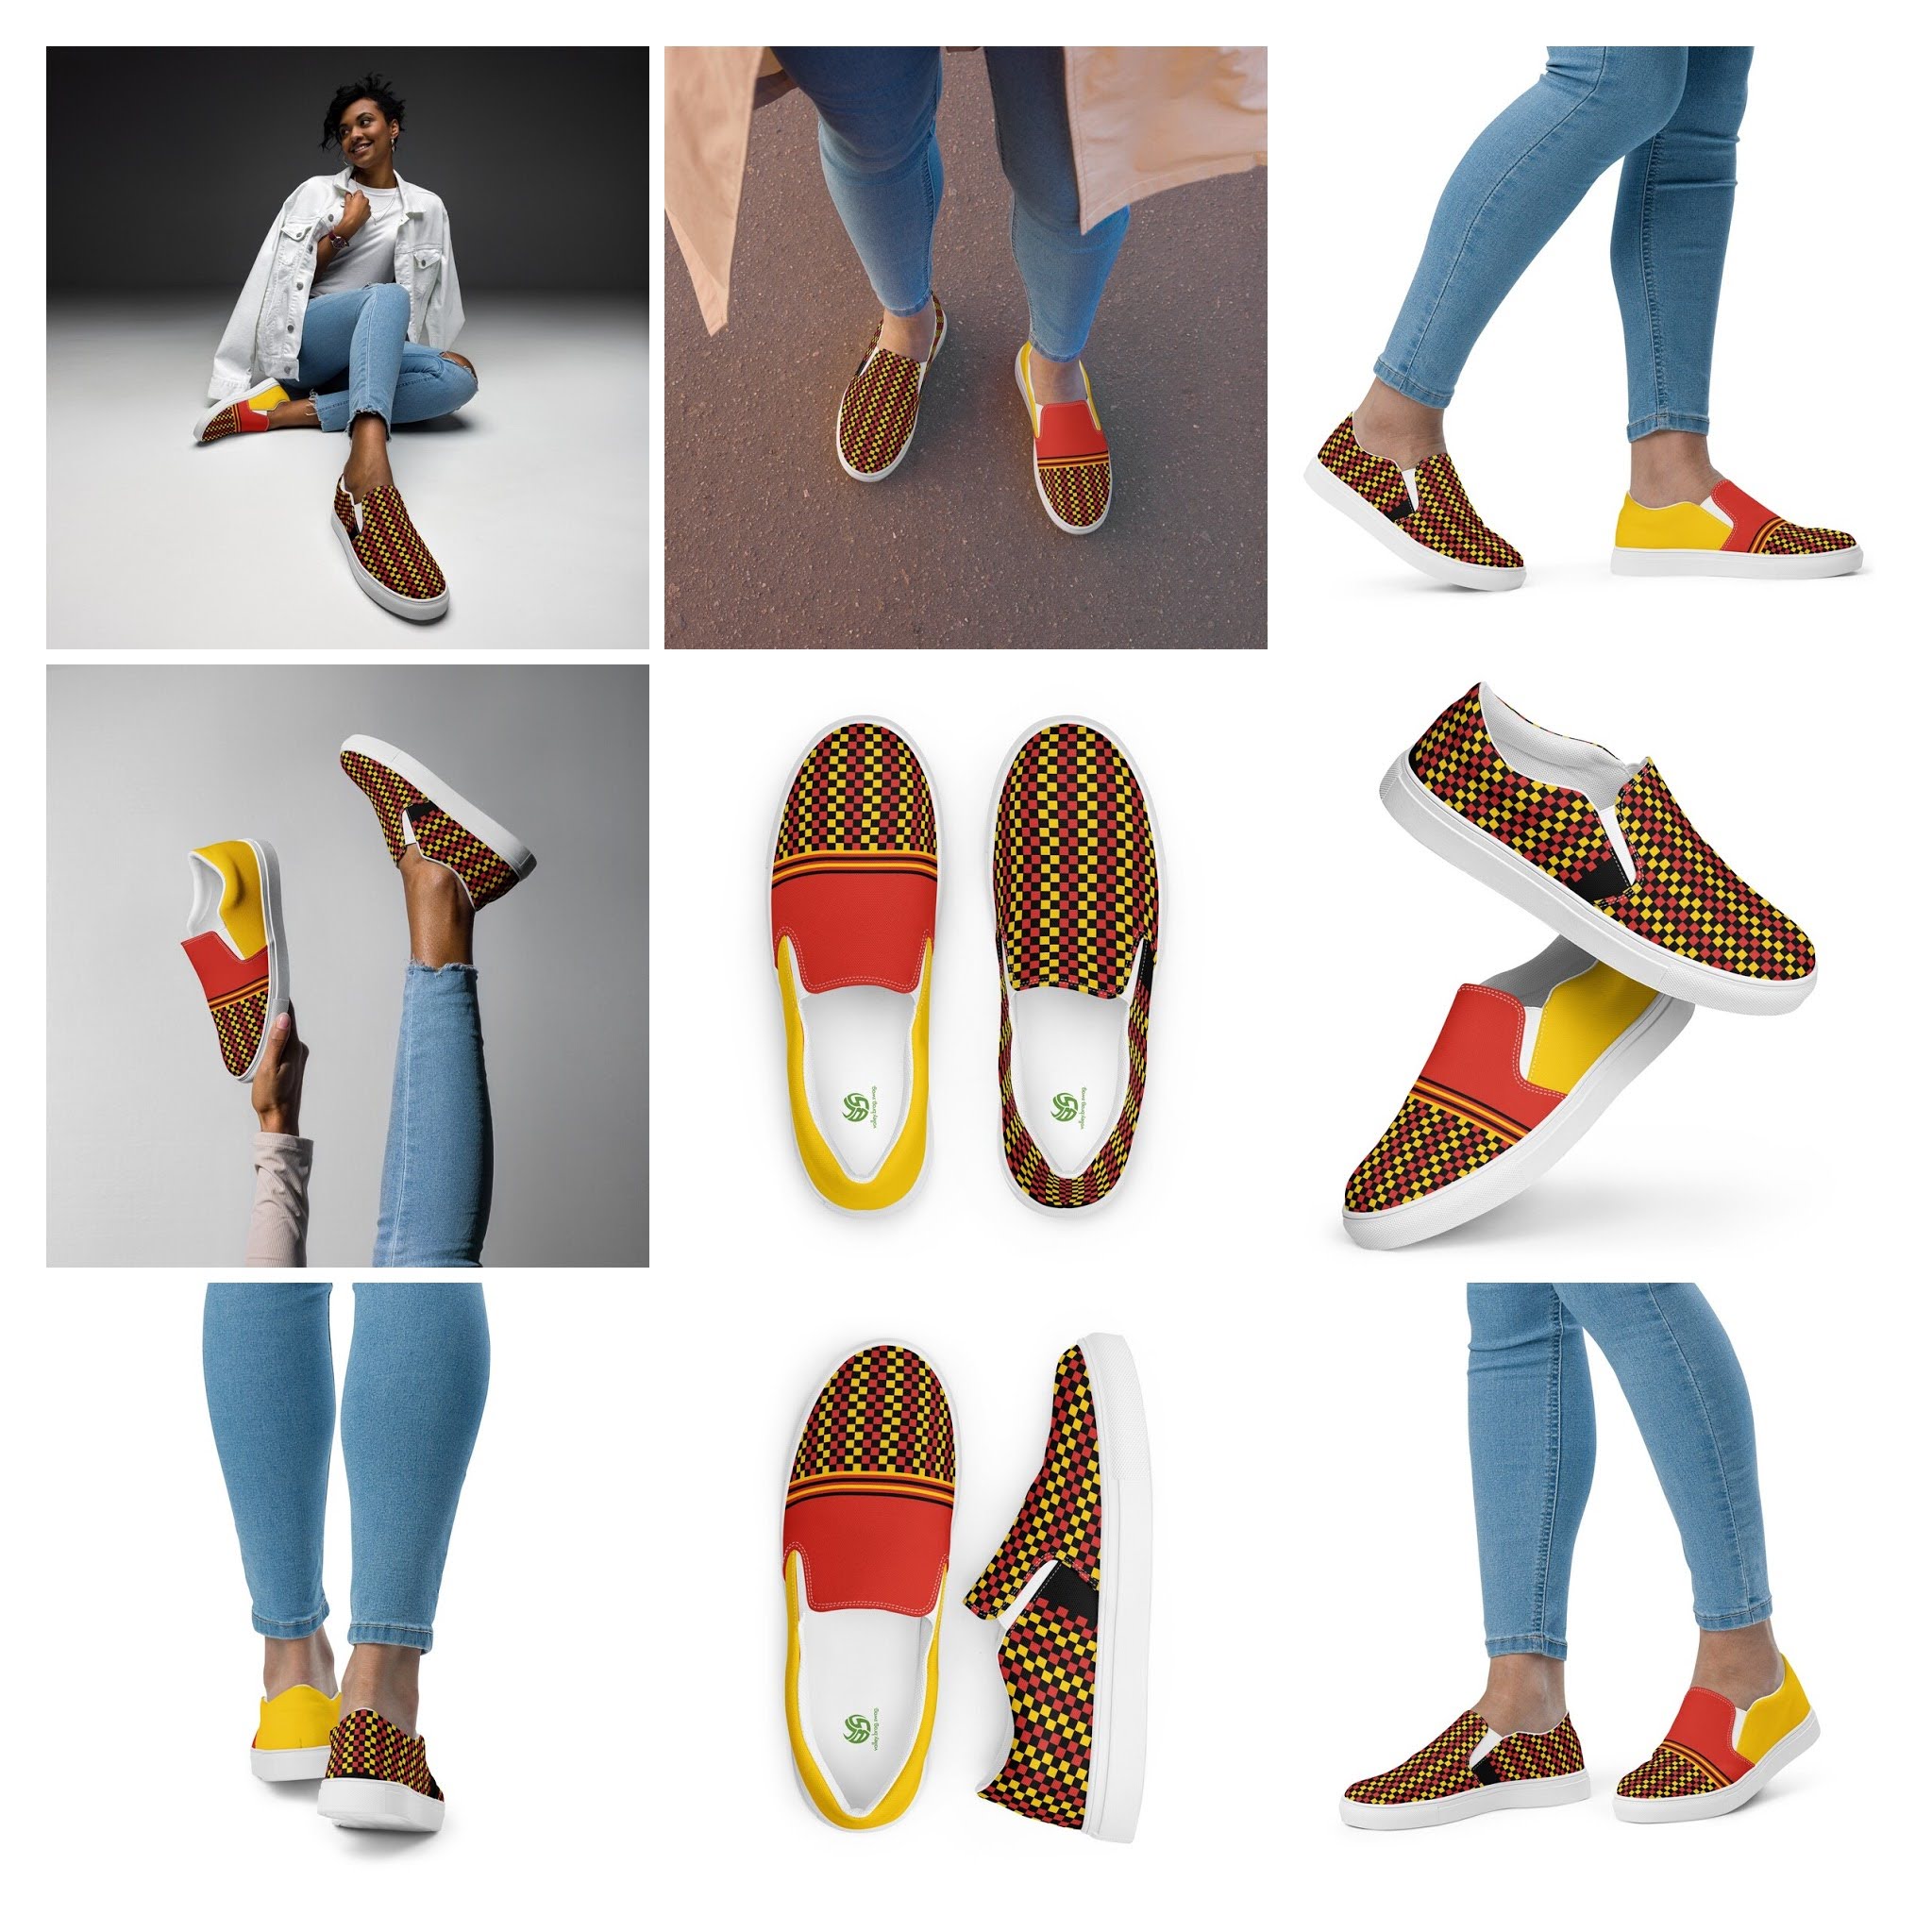 Collage Women Slip on Canvas Shoes - Each shoe just like volleyball players on the court bring their own unique talents and qualities to the court and can be changed and subbed in or out on any given day.